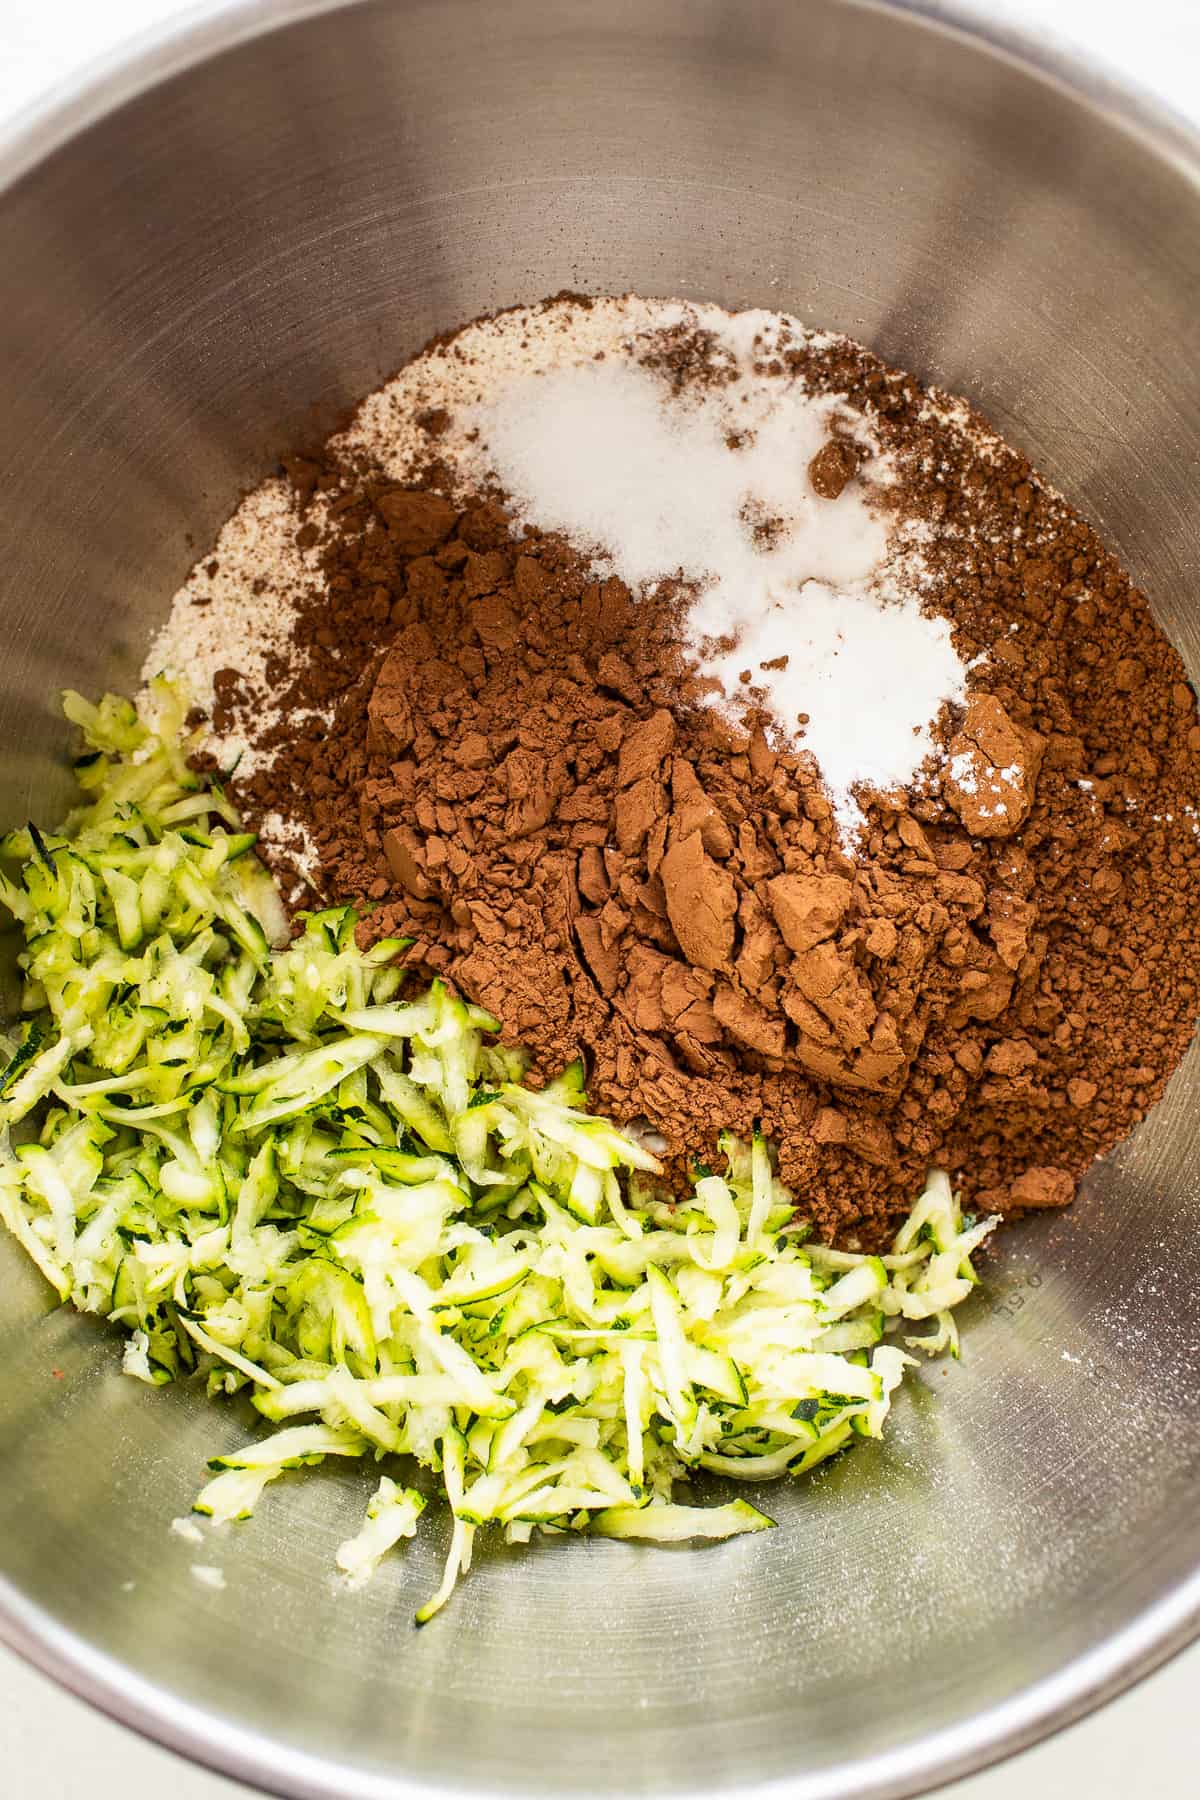 Dry ingredients for chocolate zucchini bread in a bowl.